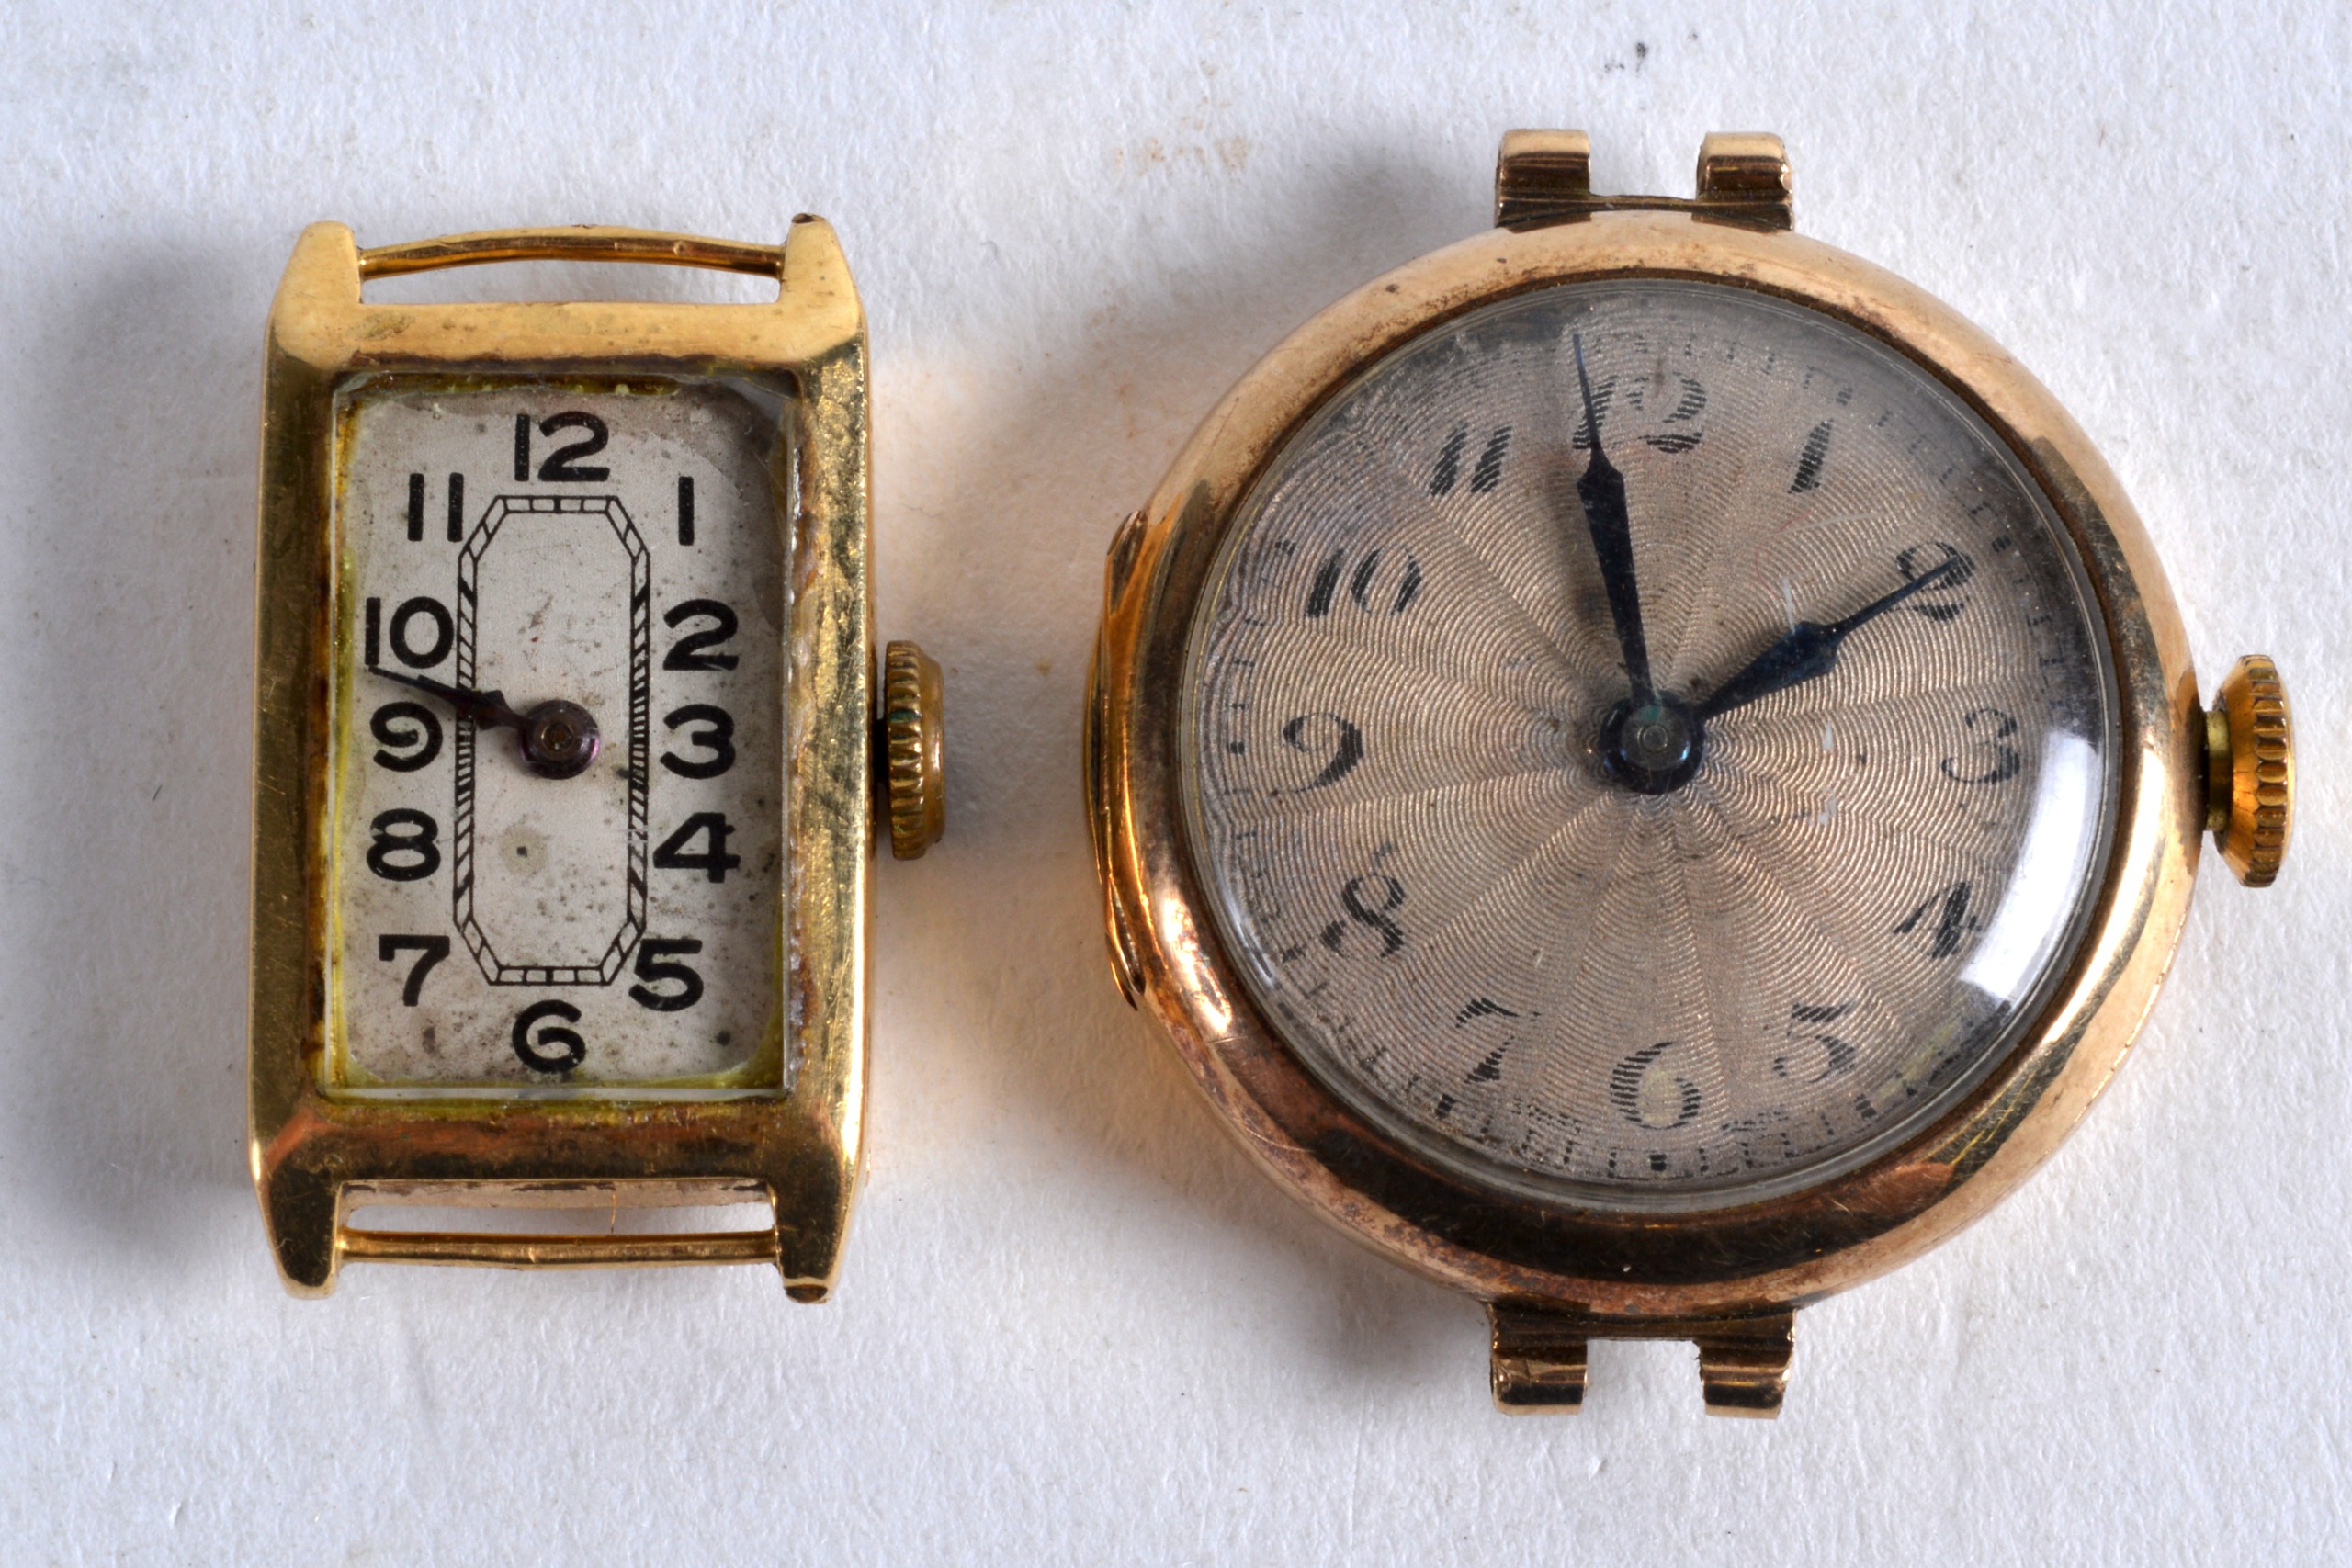 A 9CT YELLOW GOLD LADIES WATCH FACE together with an 18ct yellow gold watch face. (2)